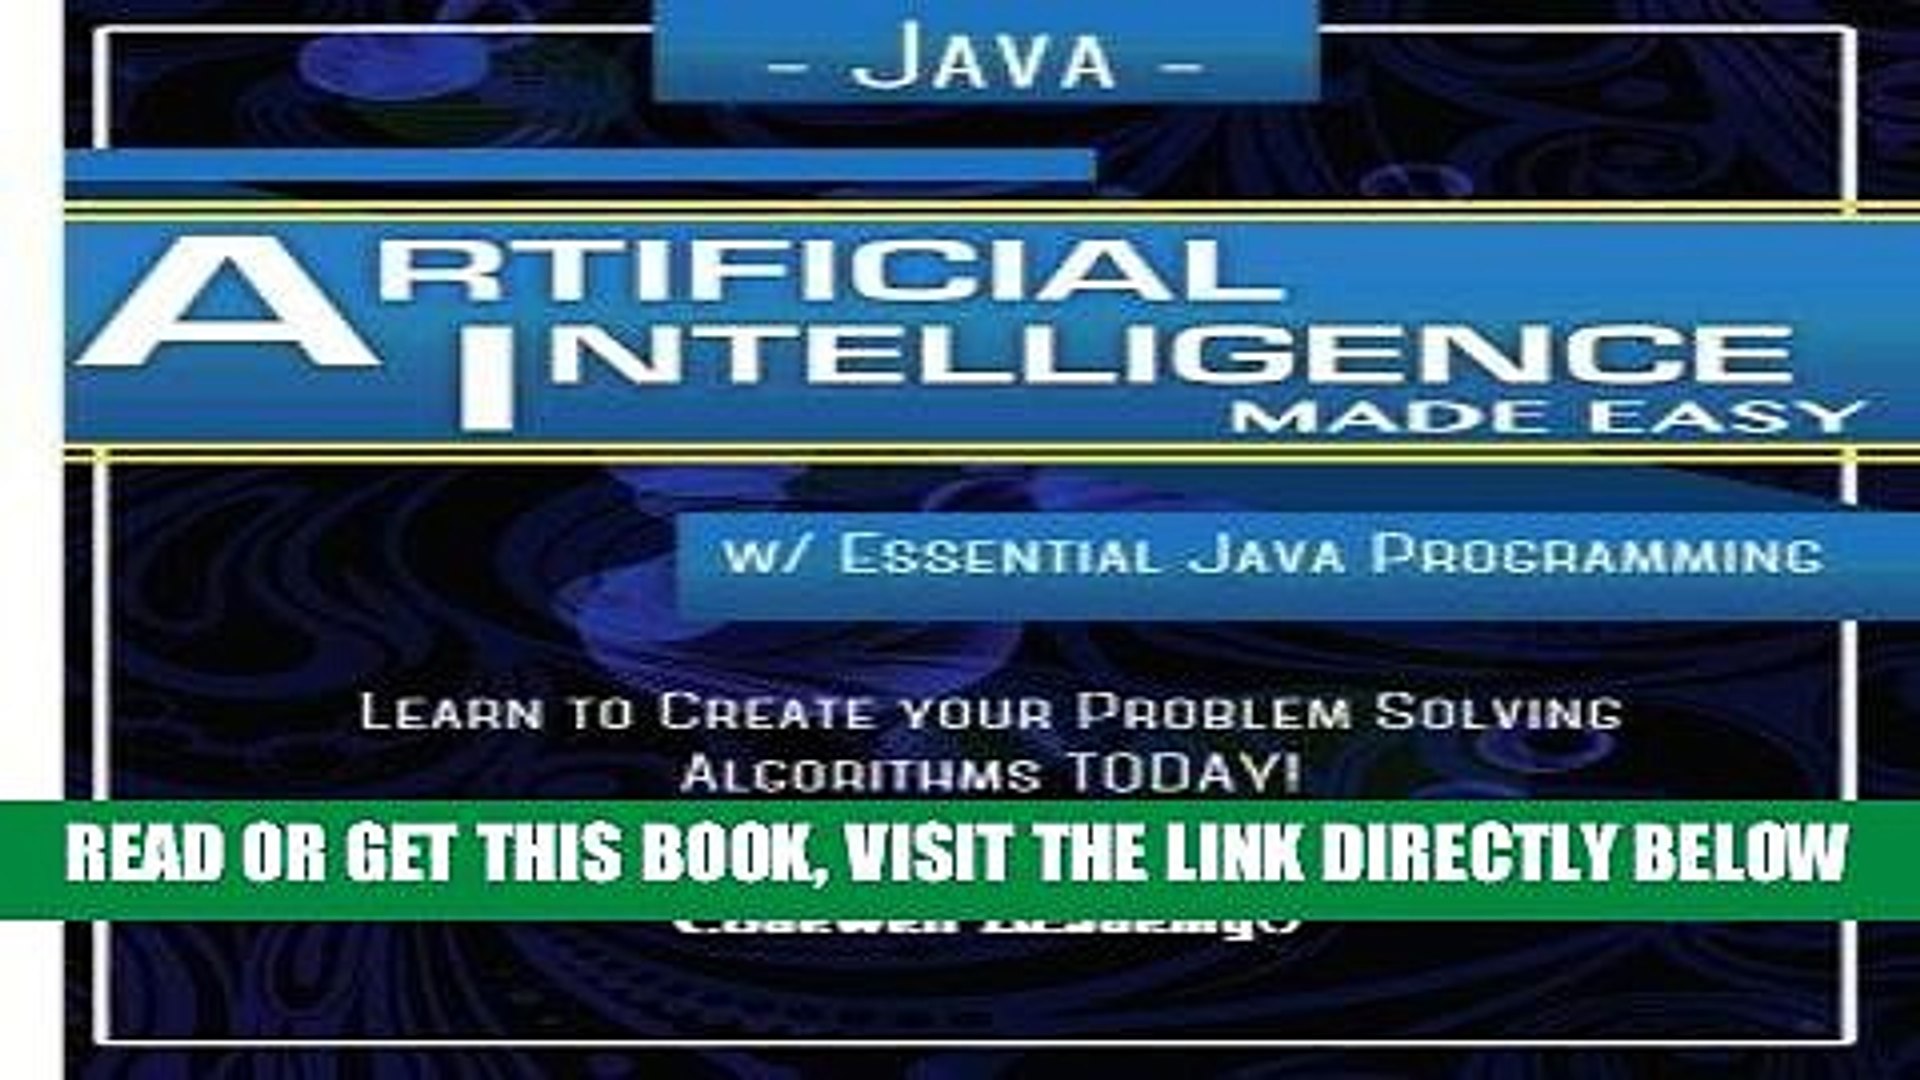 [Free Read] Java Artificial Intelligence: Made Easy, w/ Java Programming; Learn to Create your *